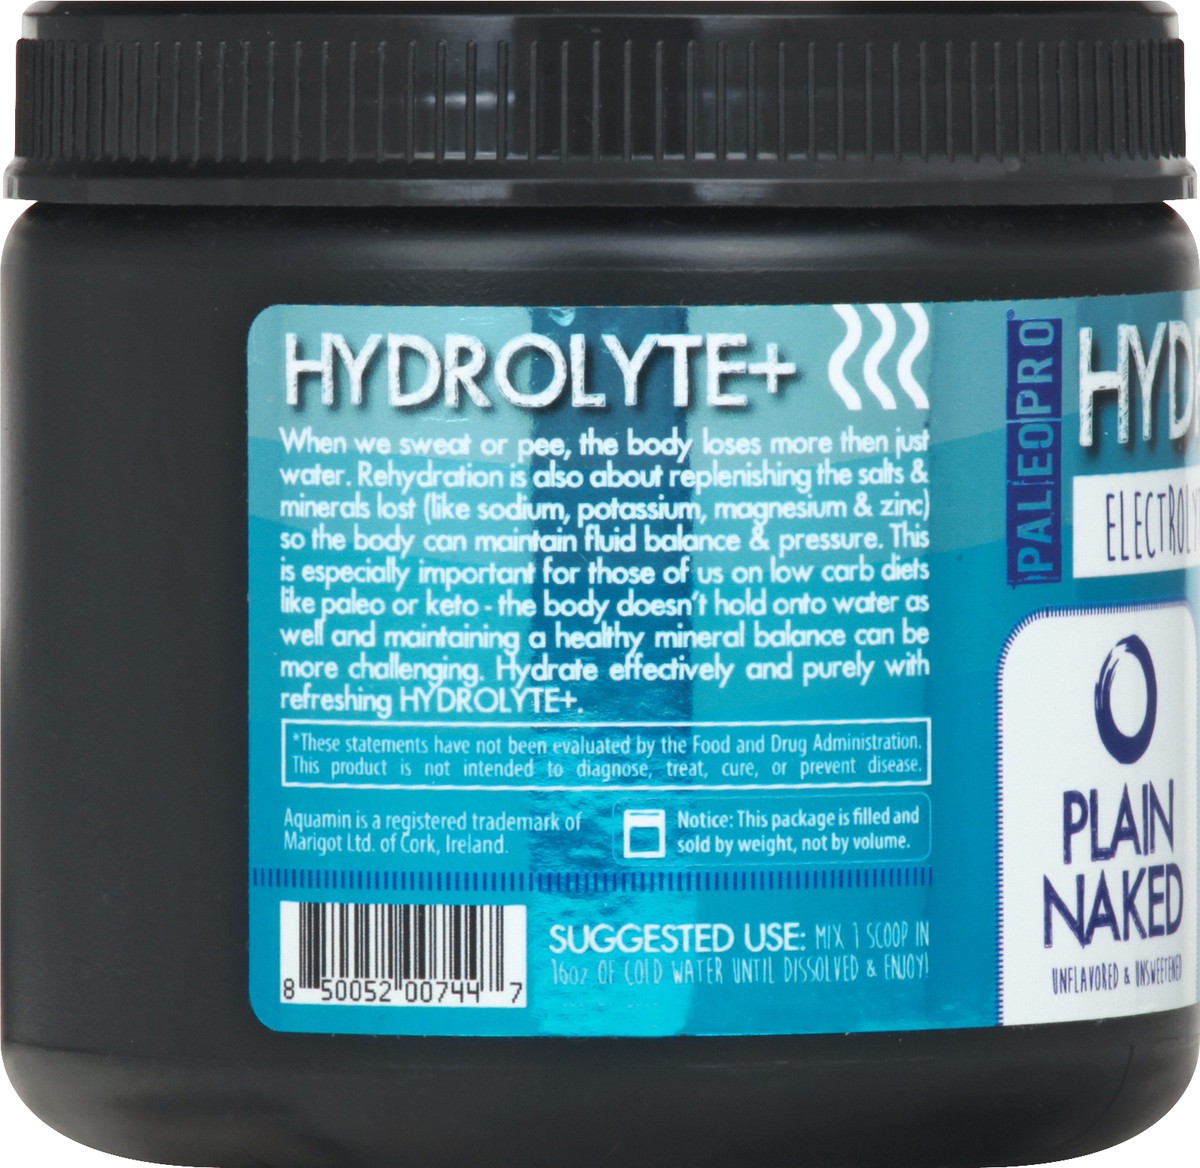 slide 11 of 13, Hydrolyte + Electrolyte Unflavored & Unsweetened Plain Naked Drink Supplement 1 ea, 6.3 oz